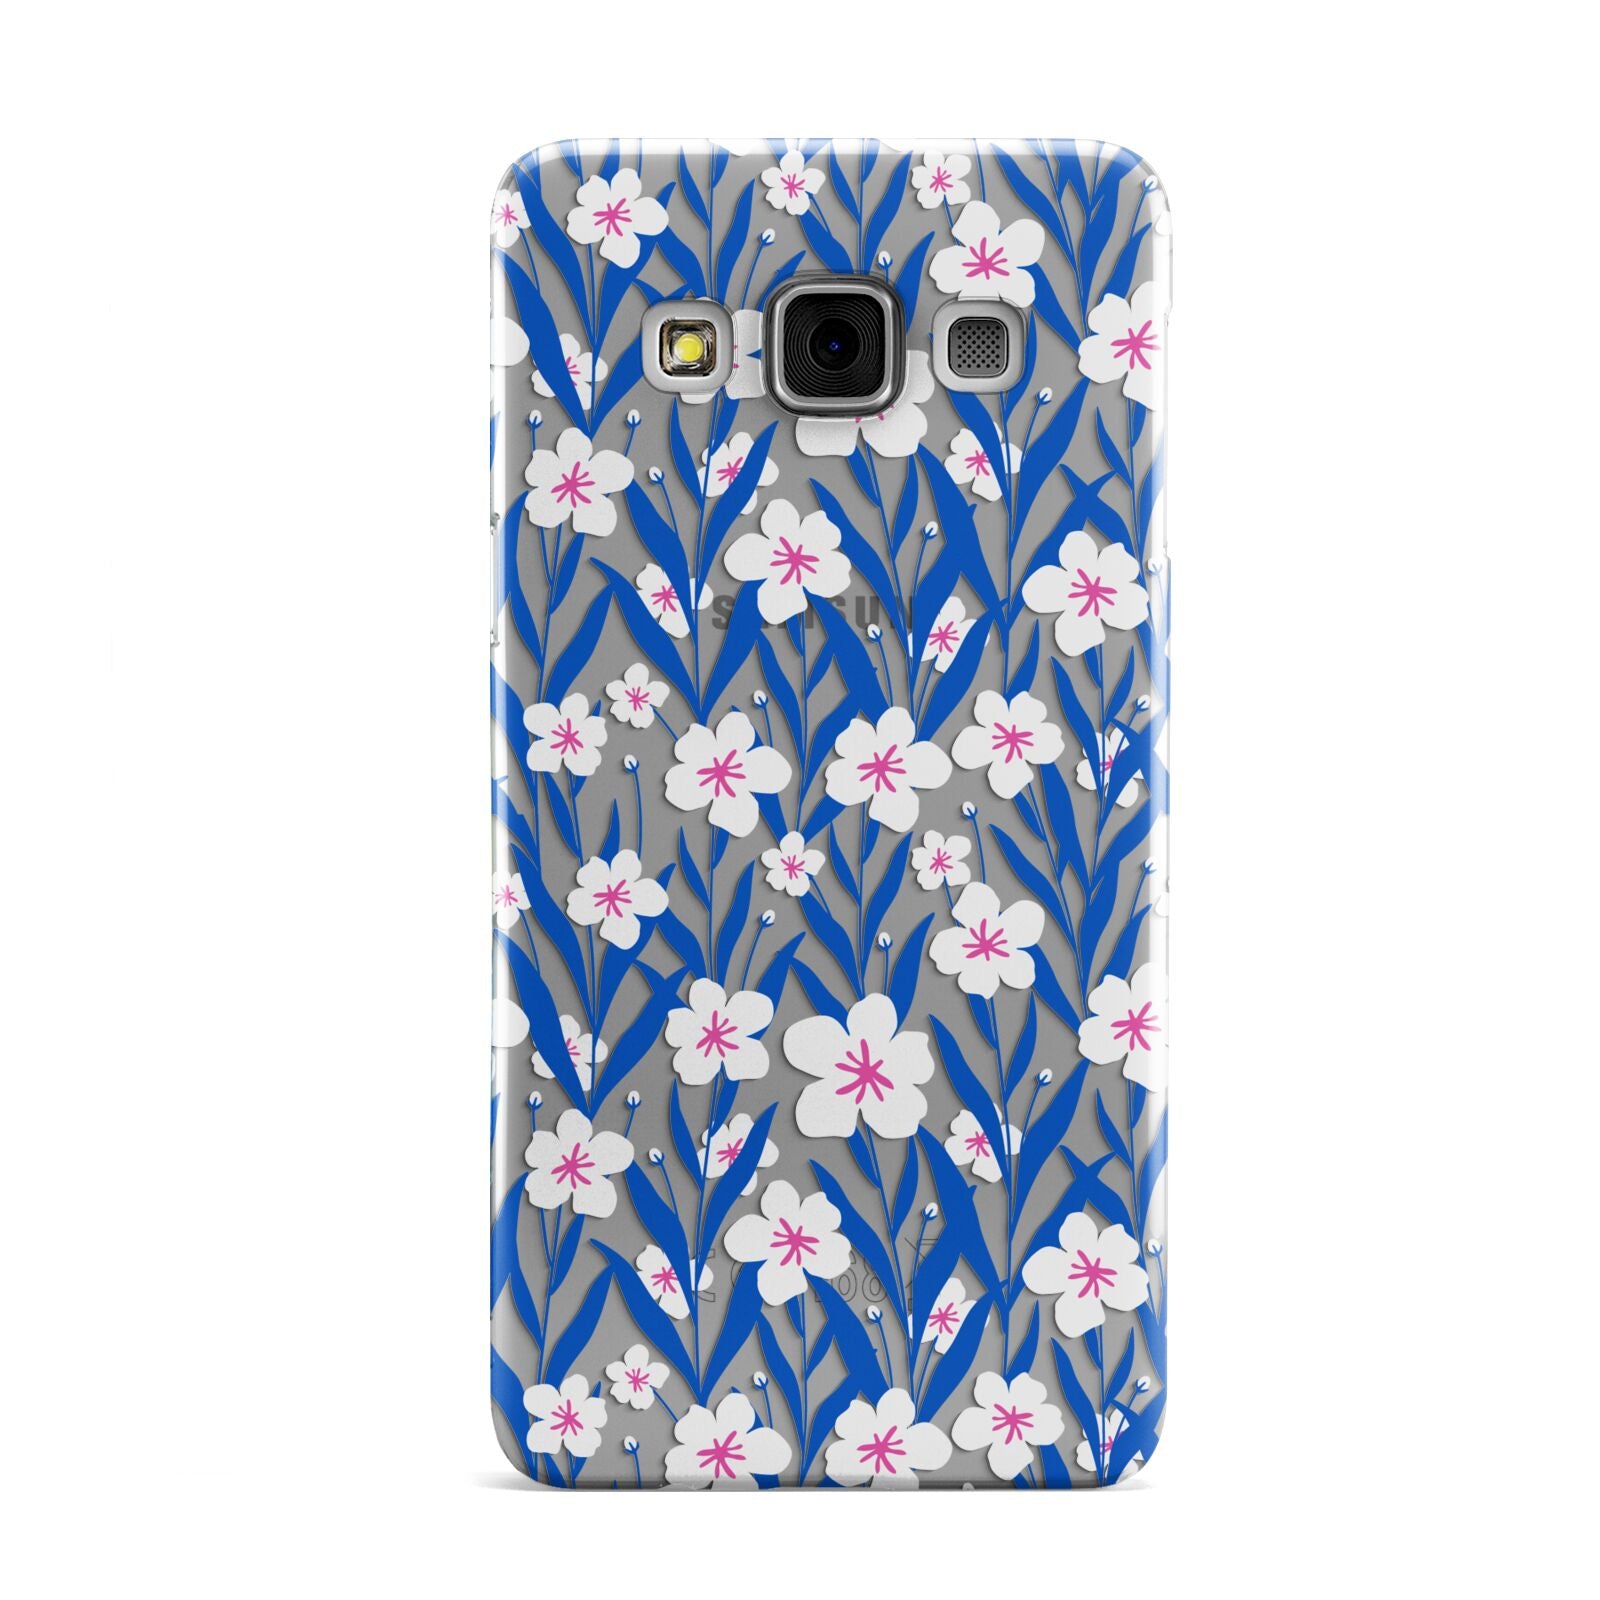 Blue and White Flowers Samsung Galaxy A3 Case